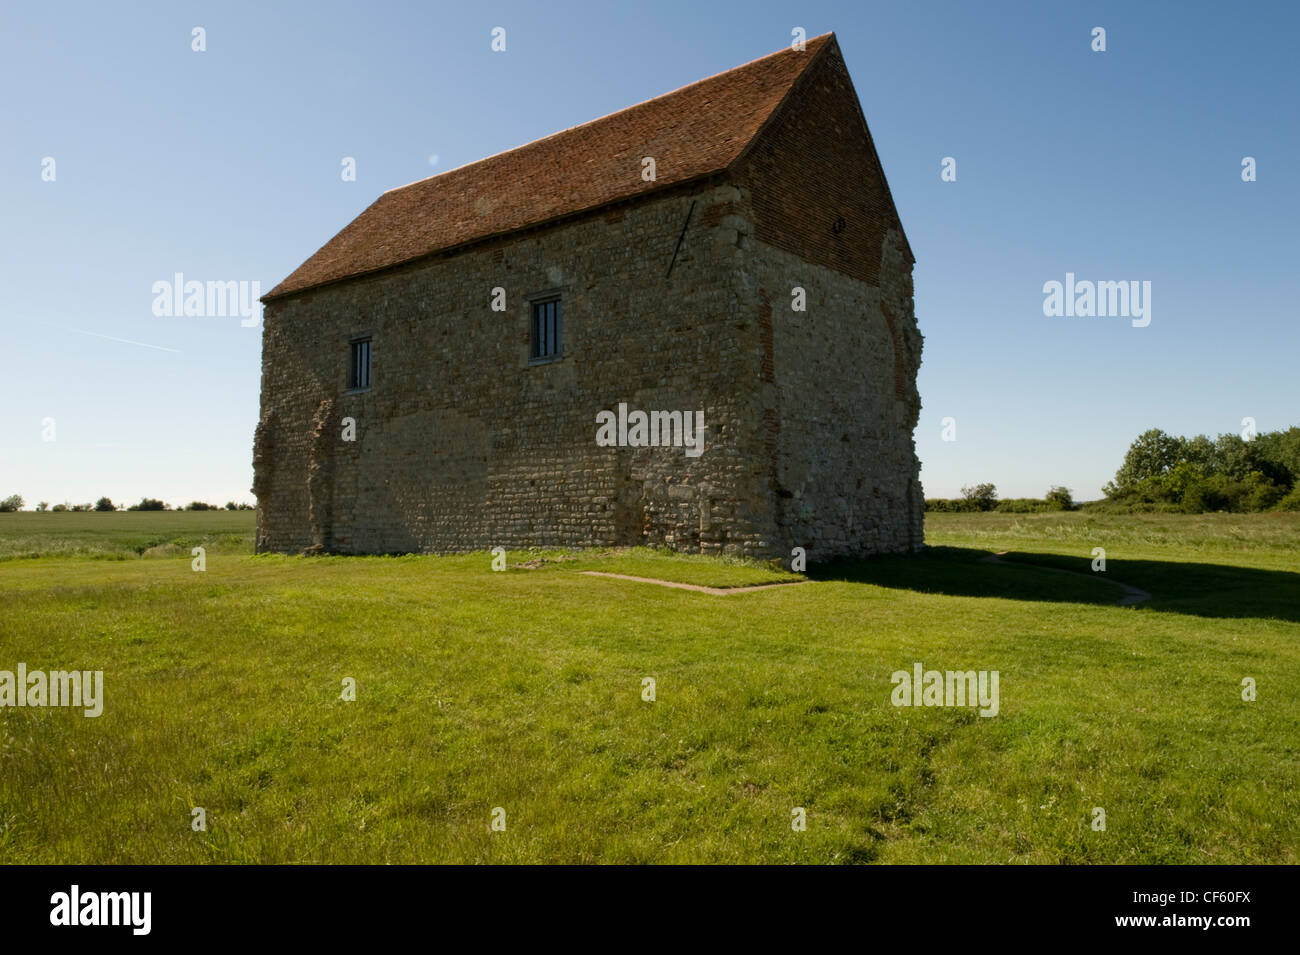 The Chapel of St Peter-on-the-Wall. It is the oldest church in the UK dating back to 654AD. Stock Photo